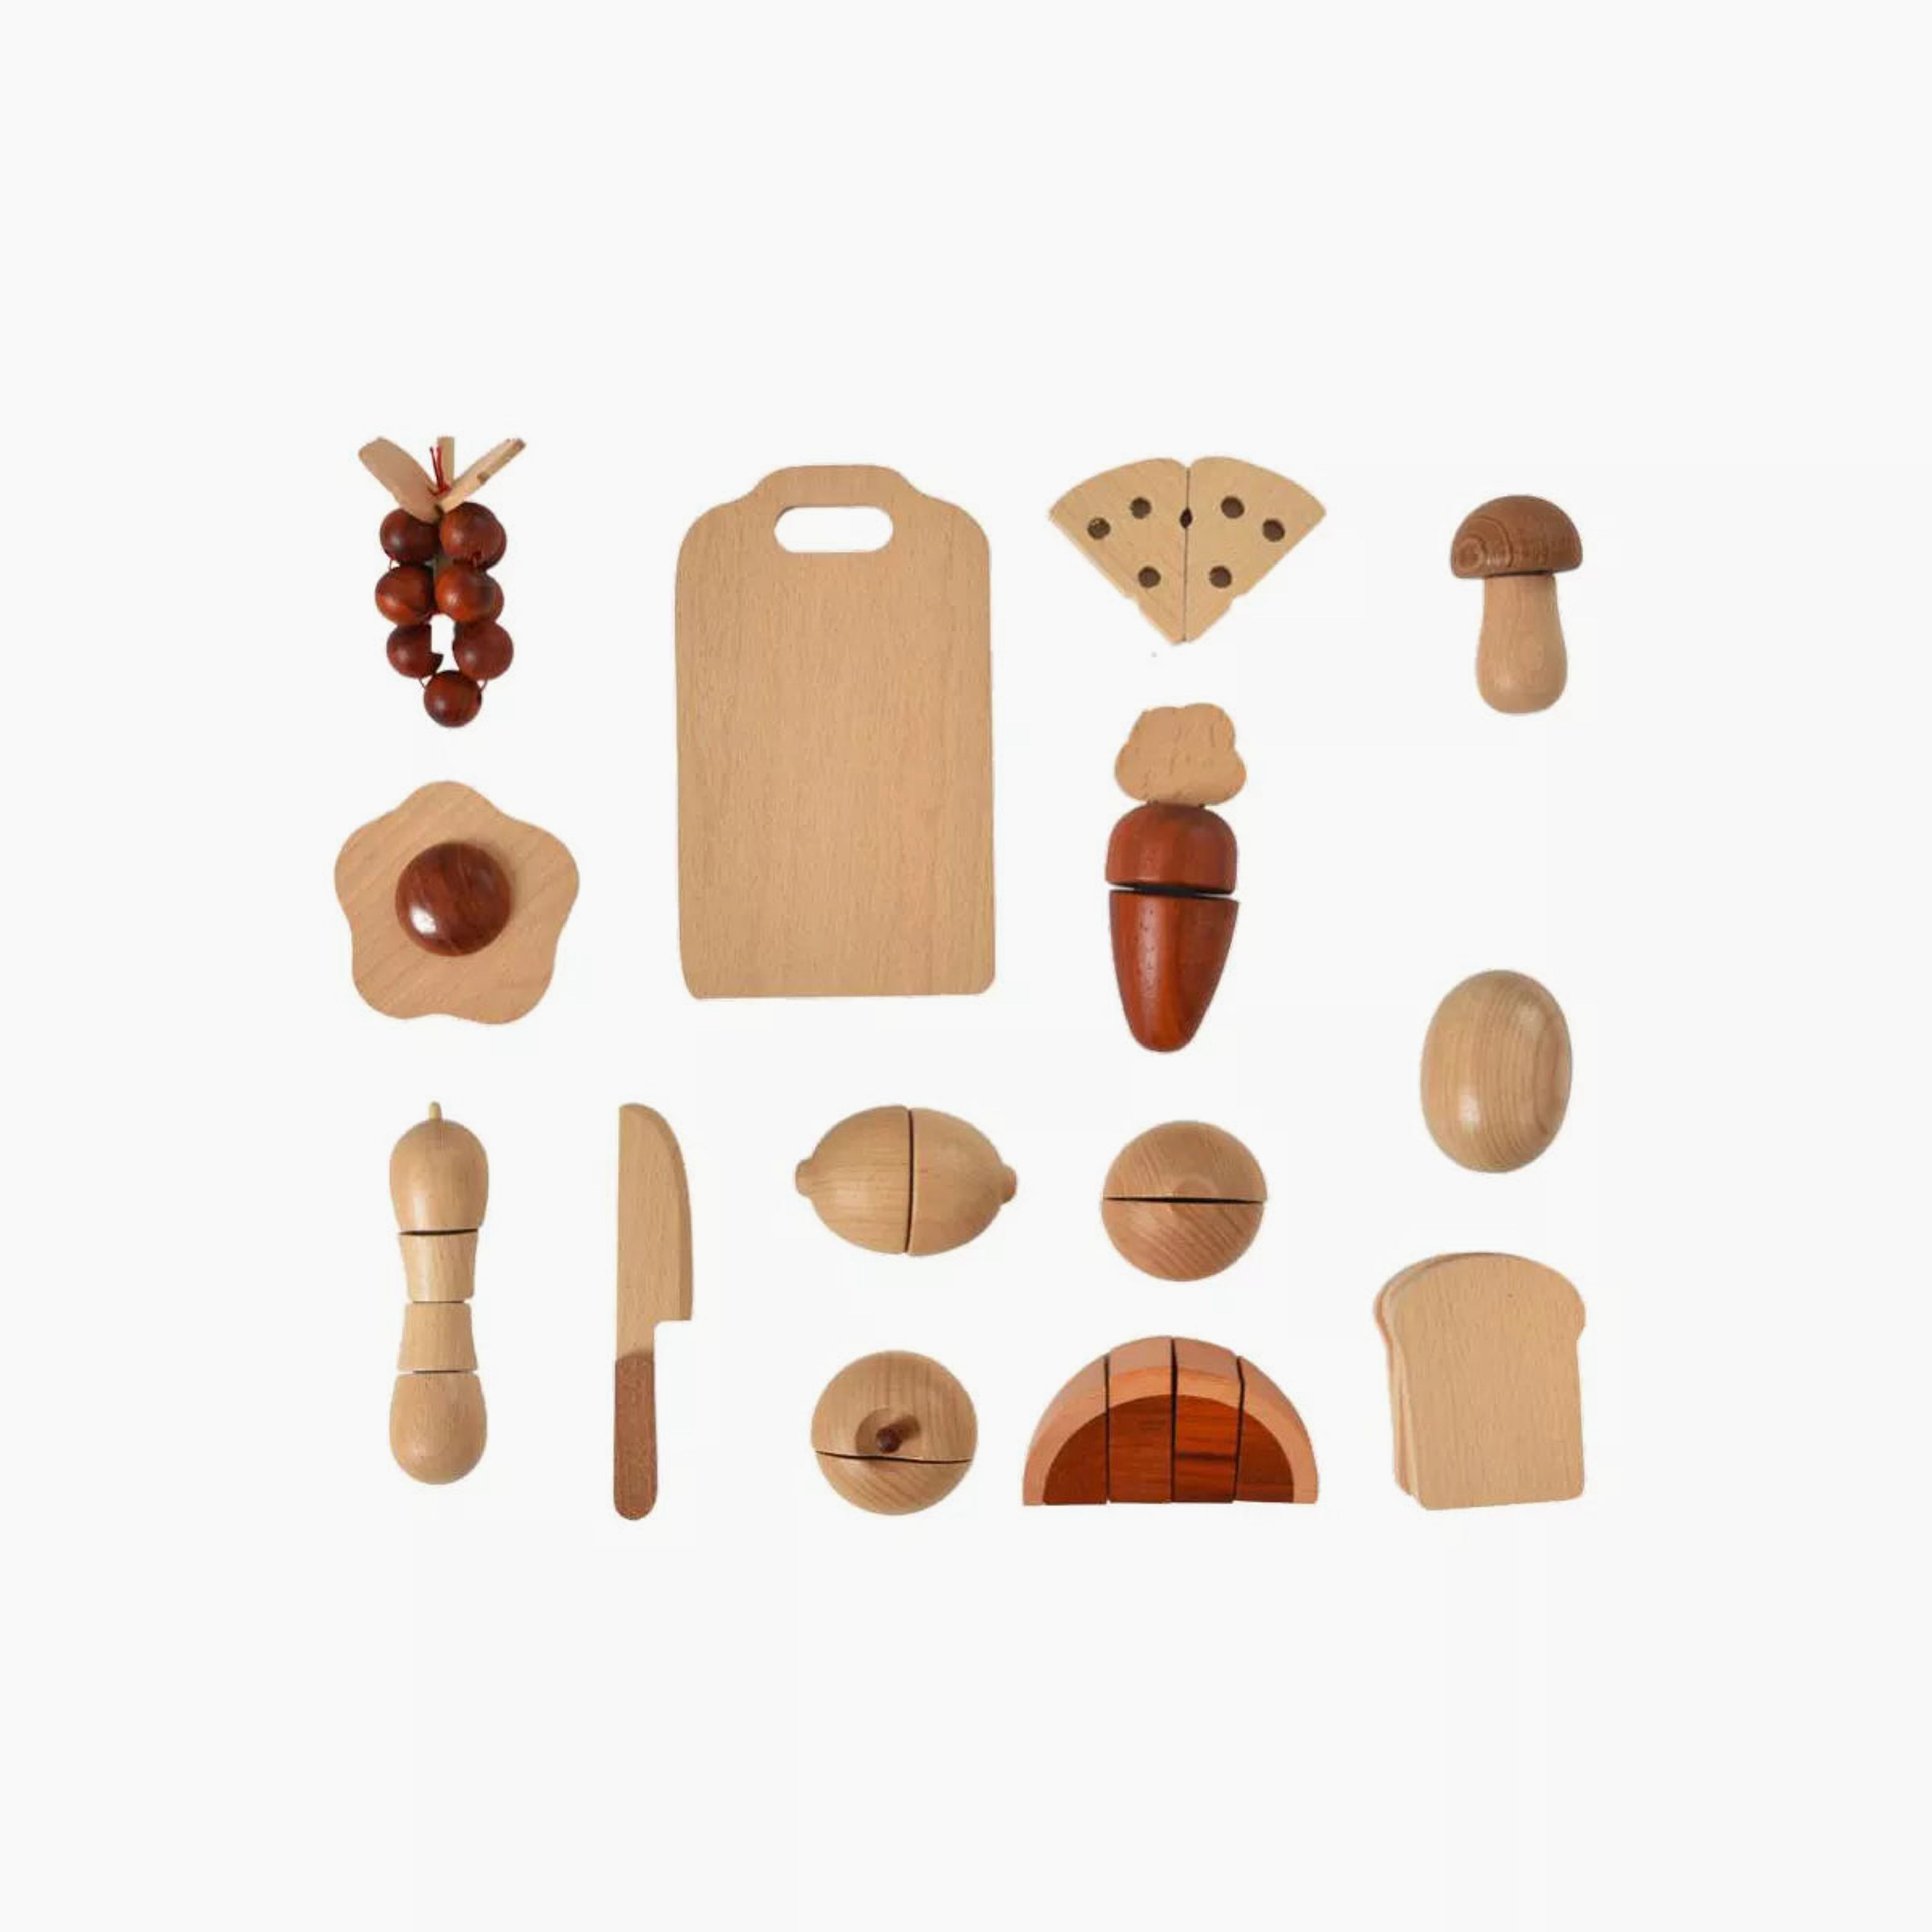 Wooden Play Food Sets for Kids Kitchen